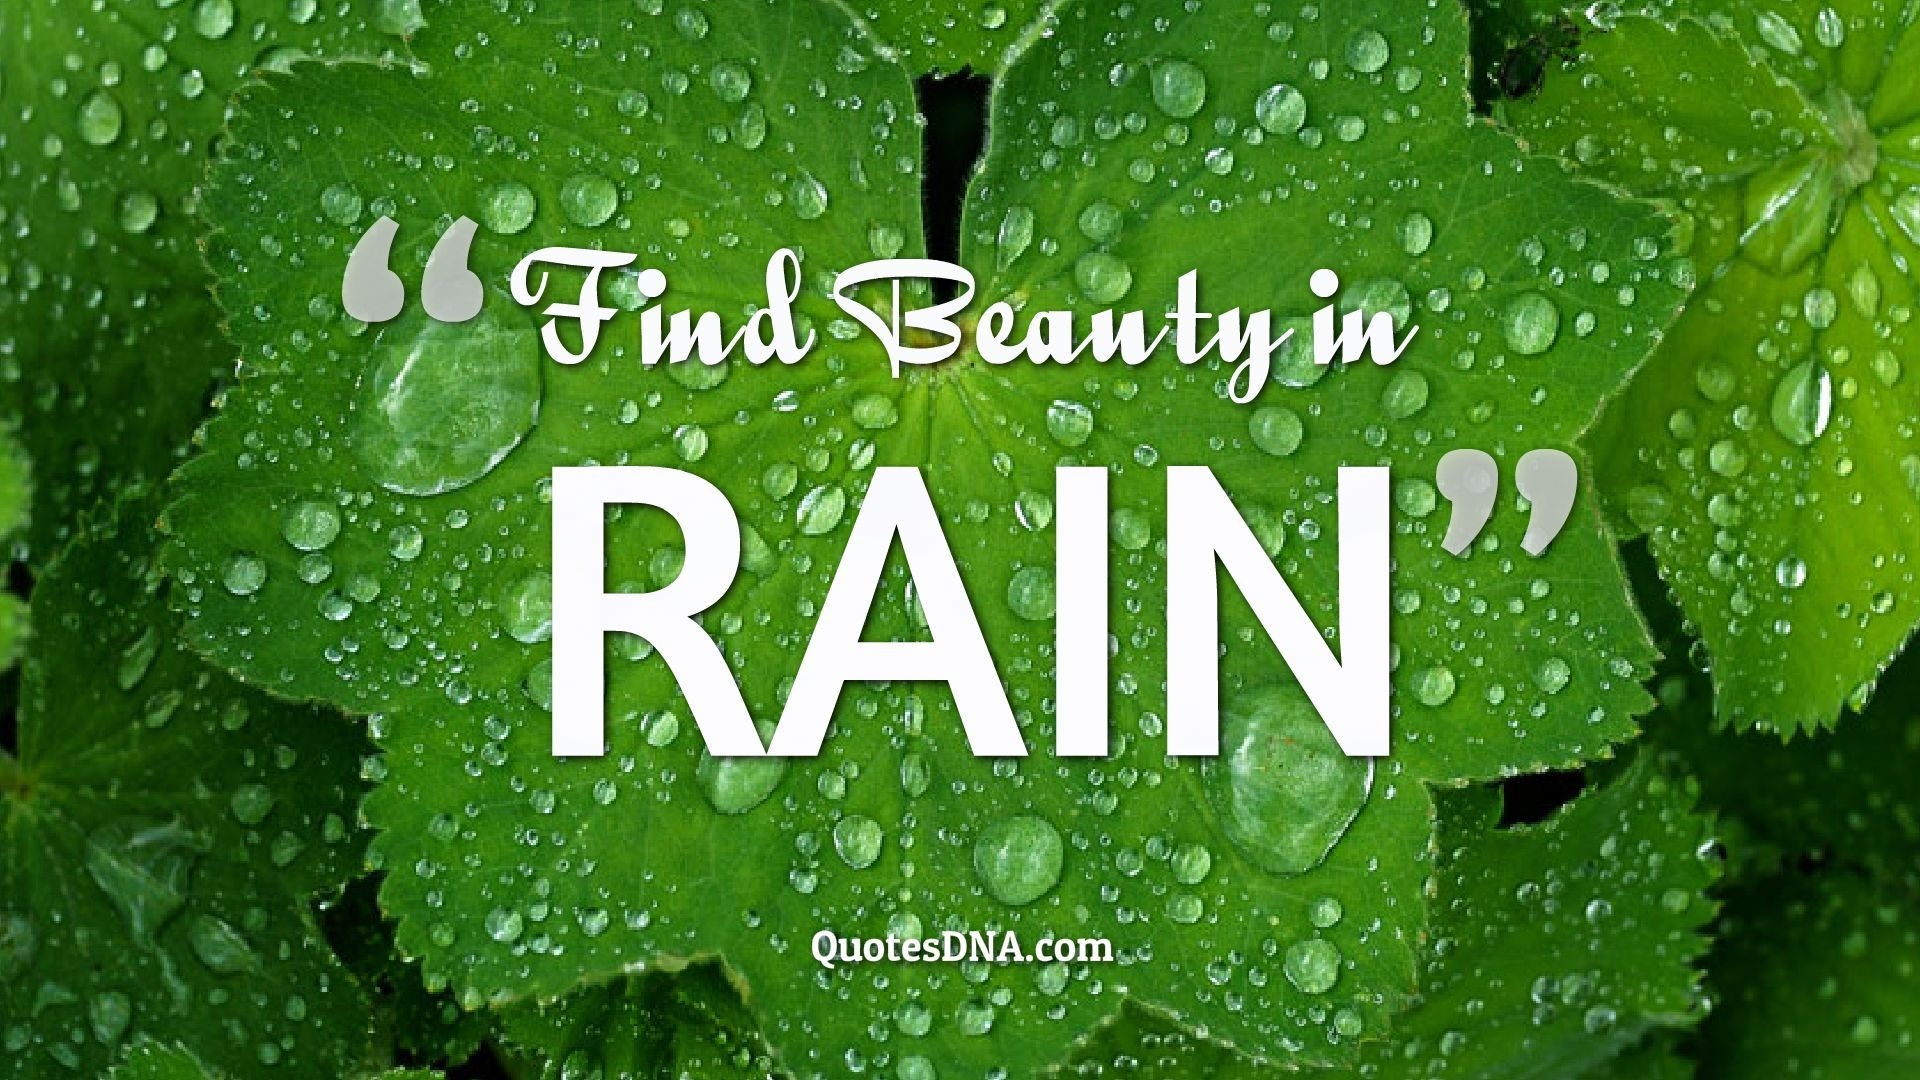 Beautiful Rain Wallpaper With Quotes - 123greety.com